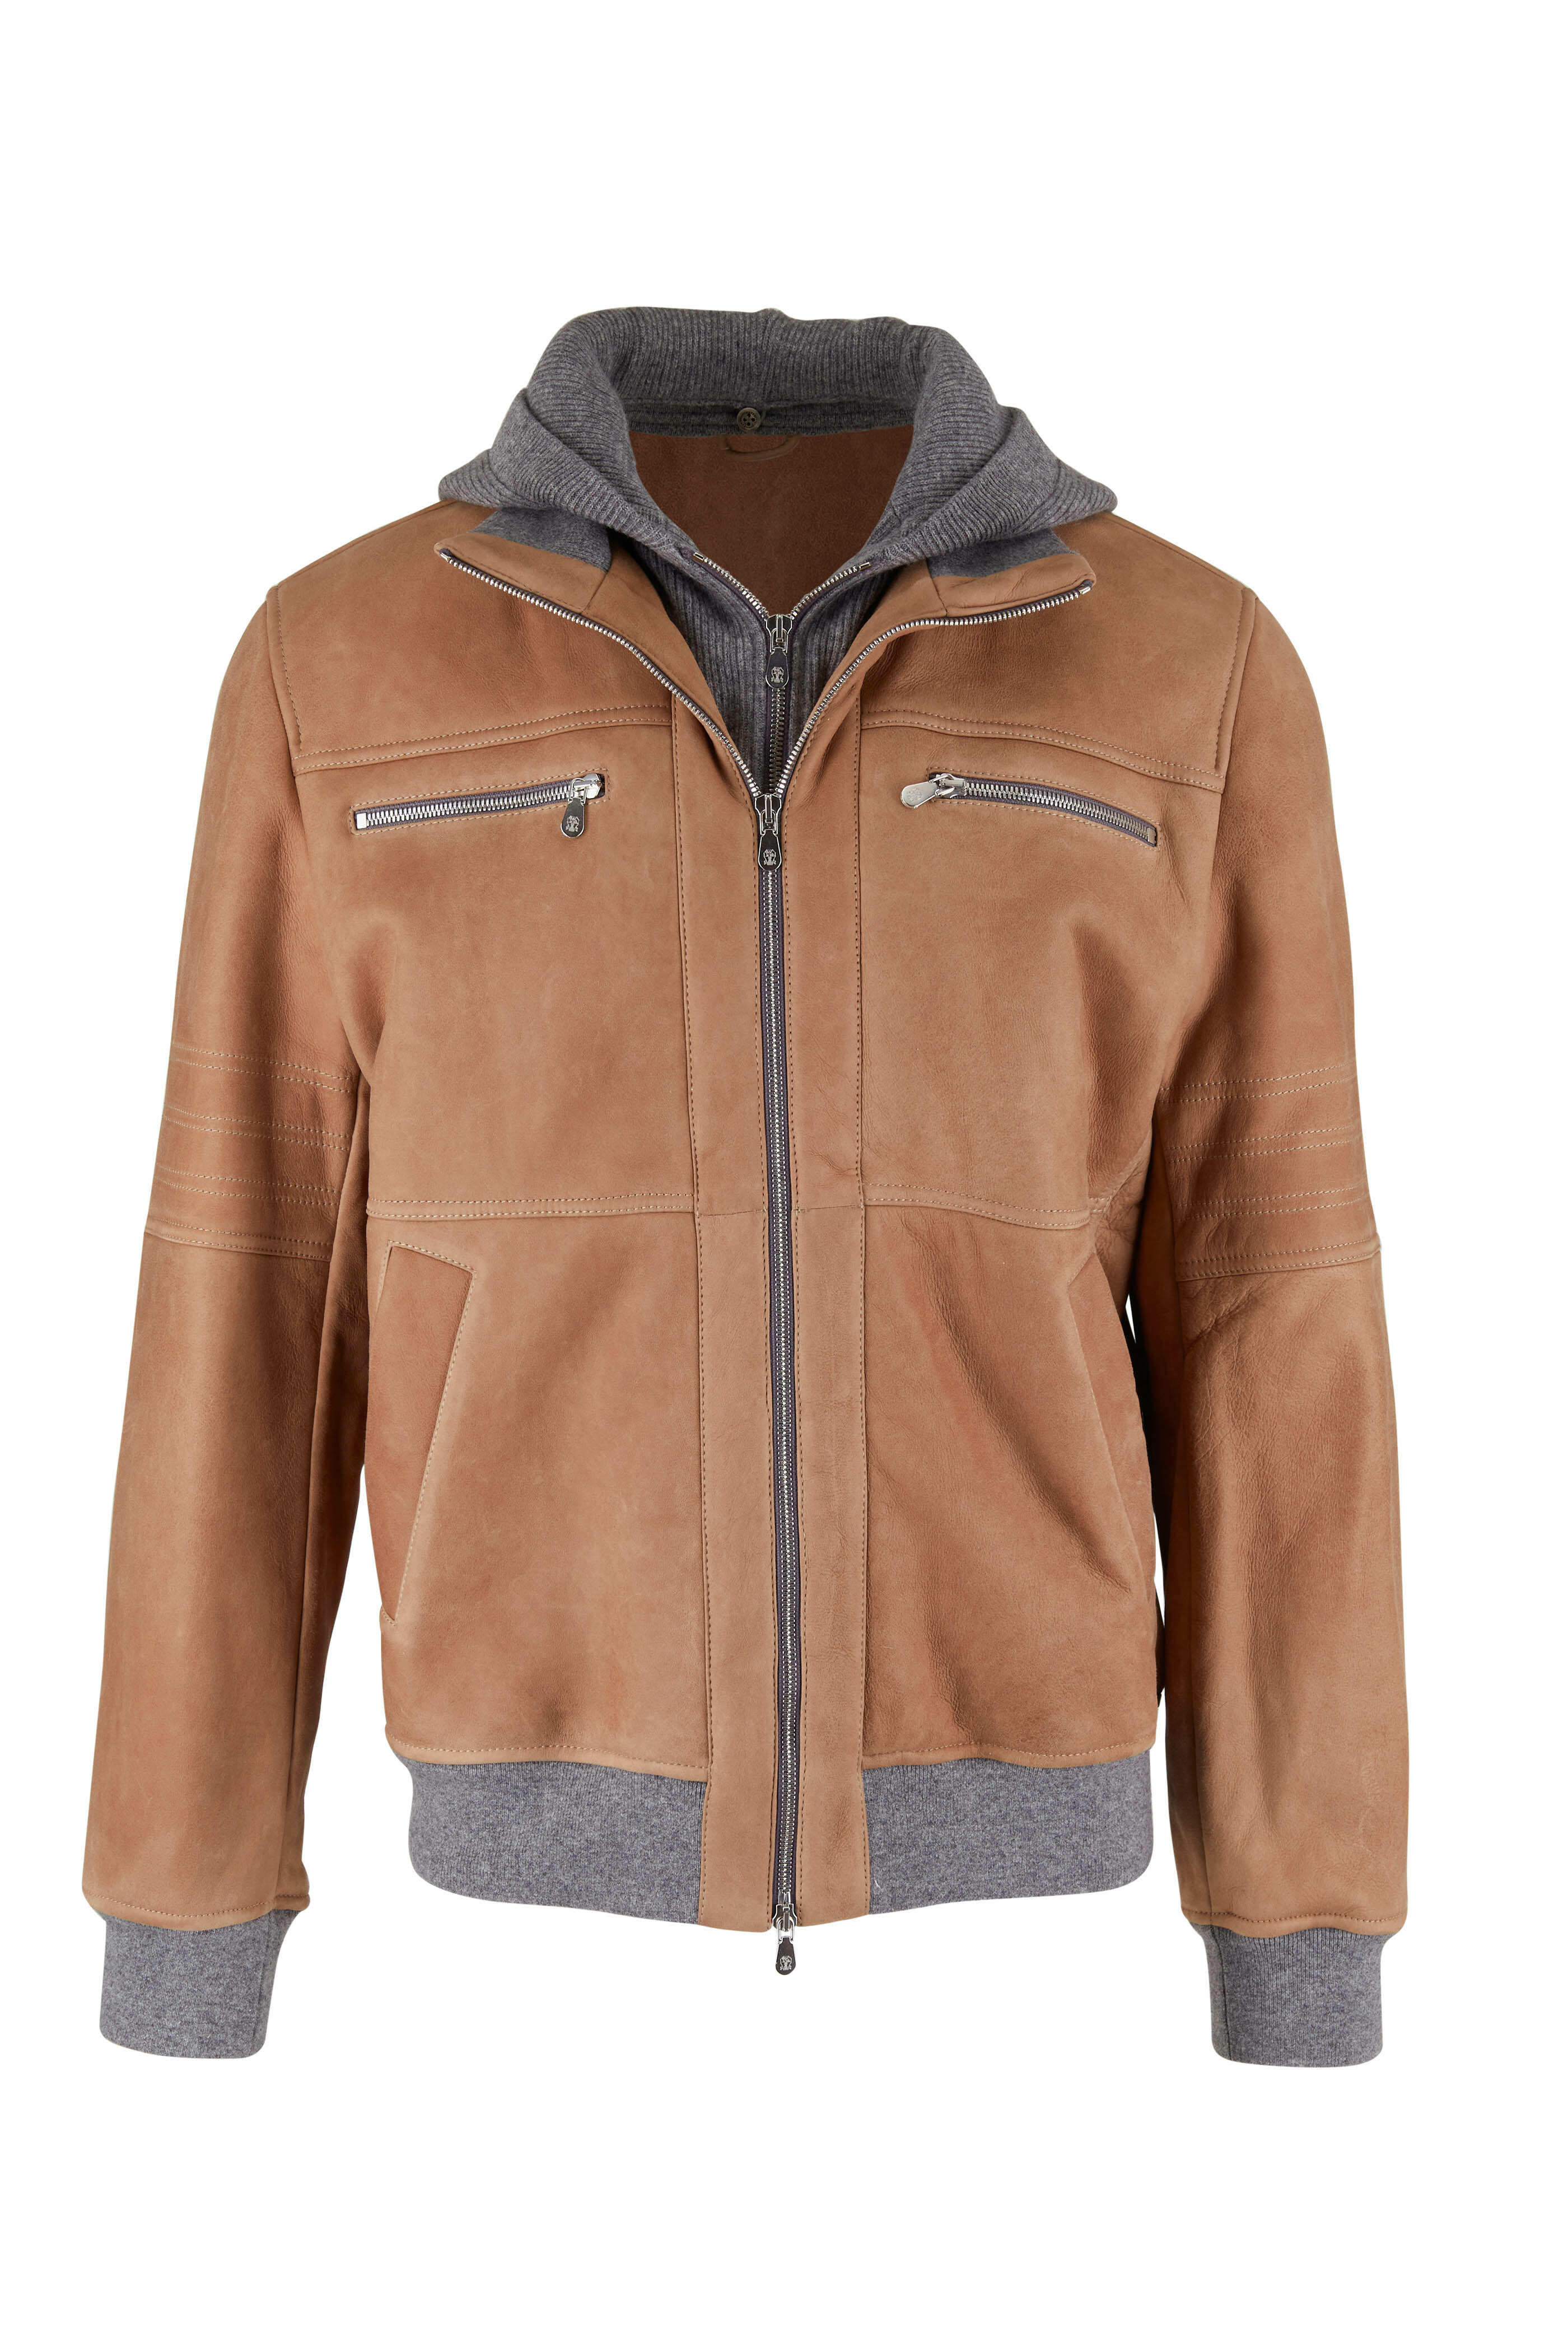 Brunello Cucinelli - Tan Suede Shearling Hooded Bomber